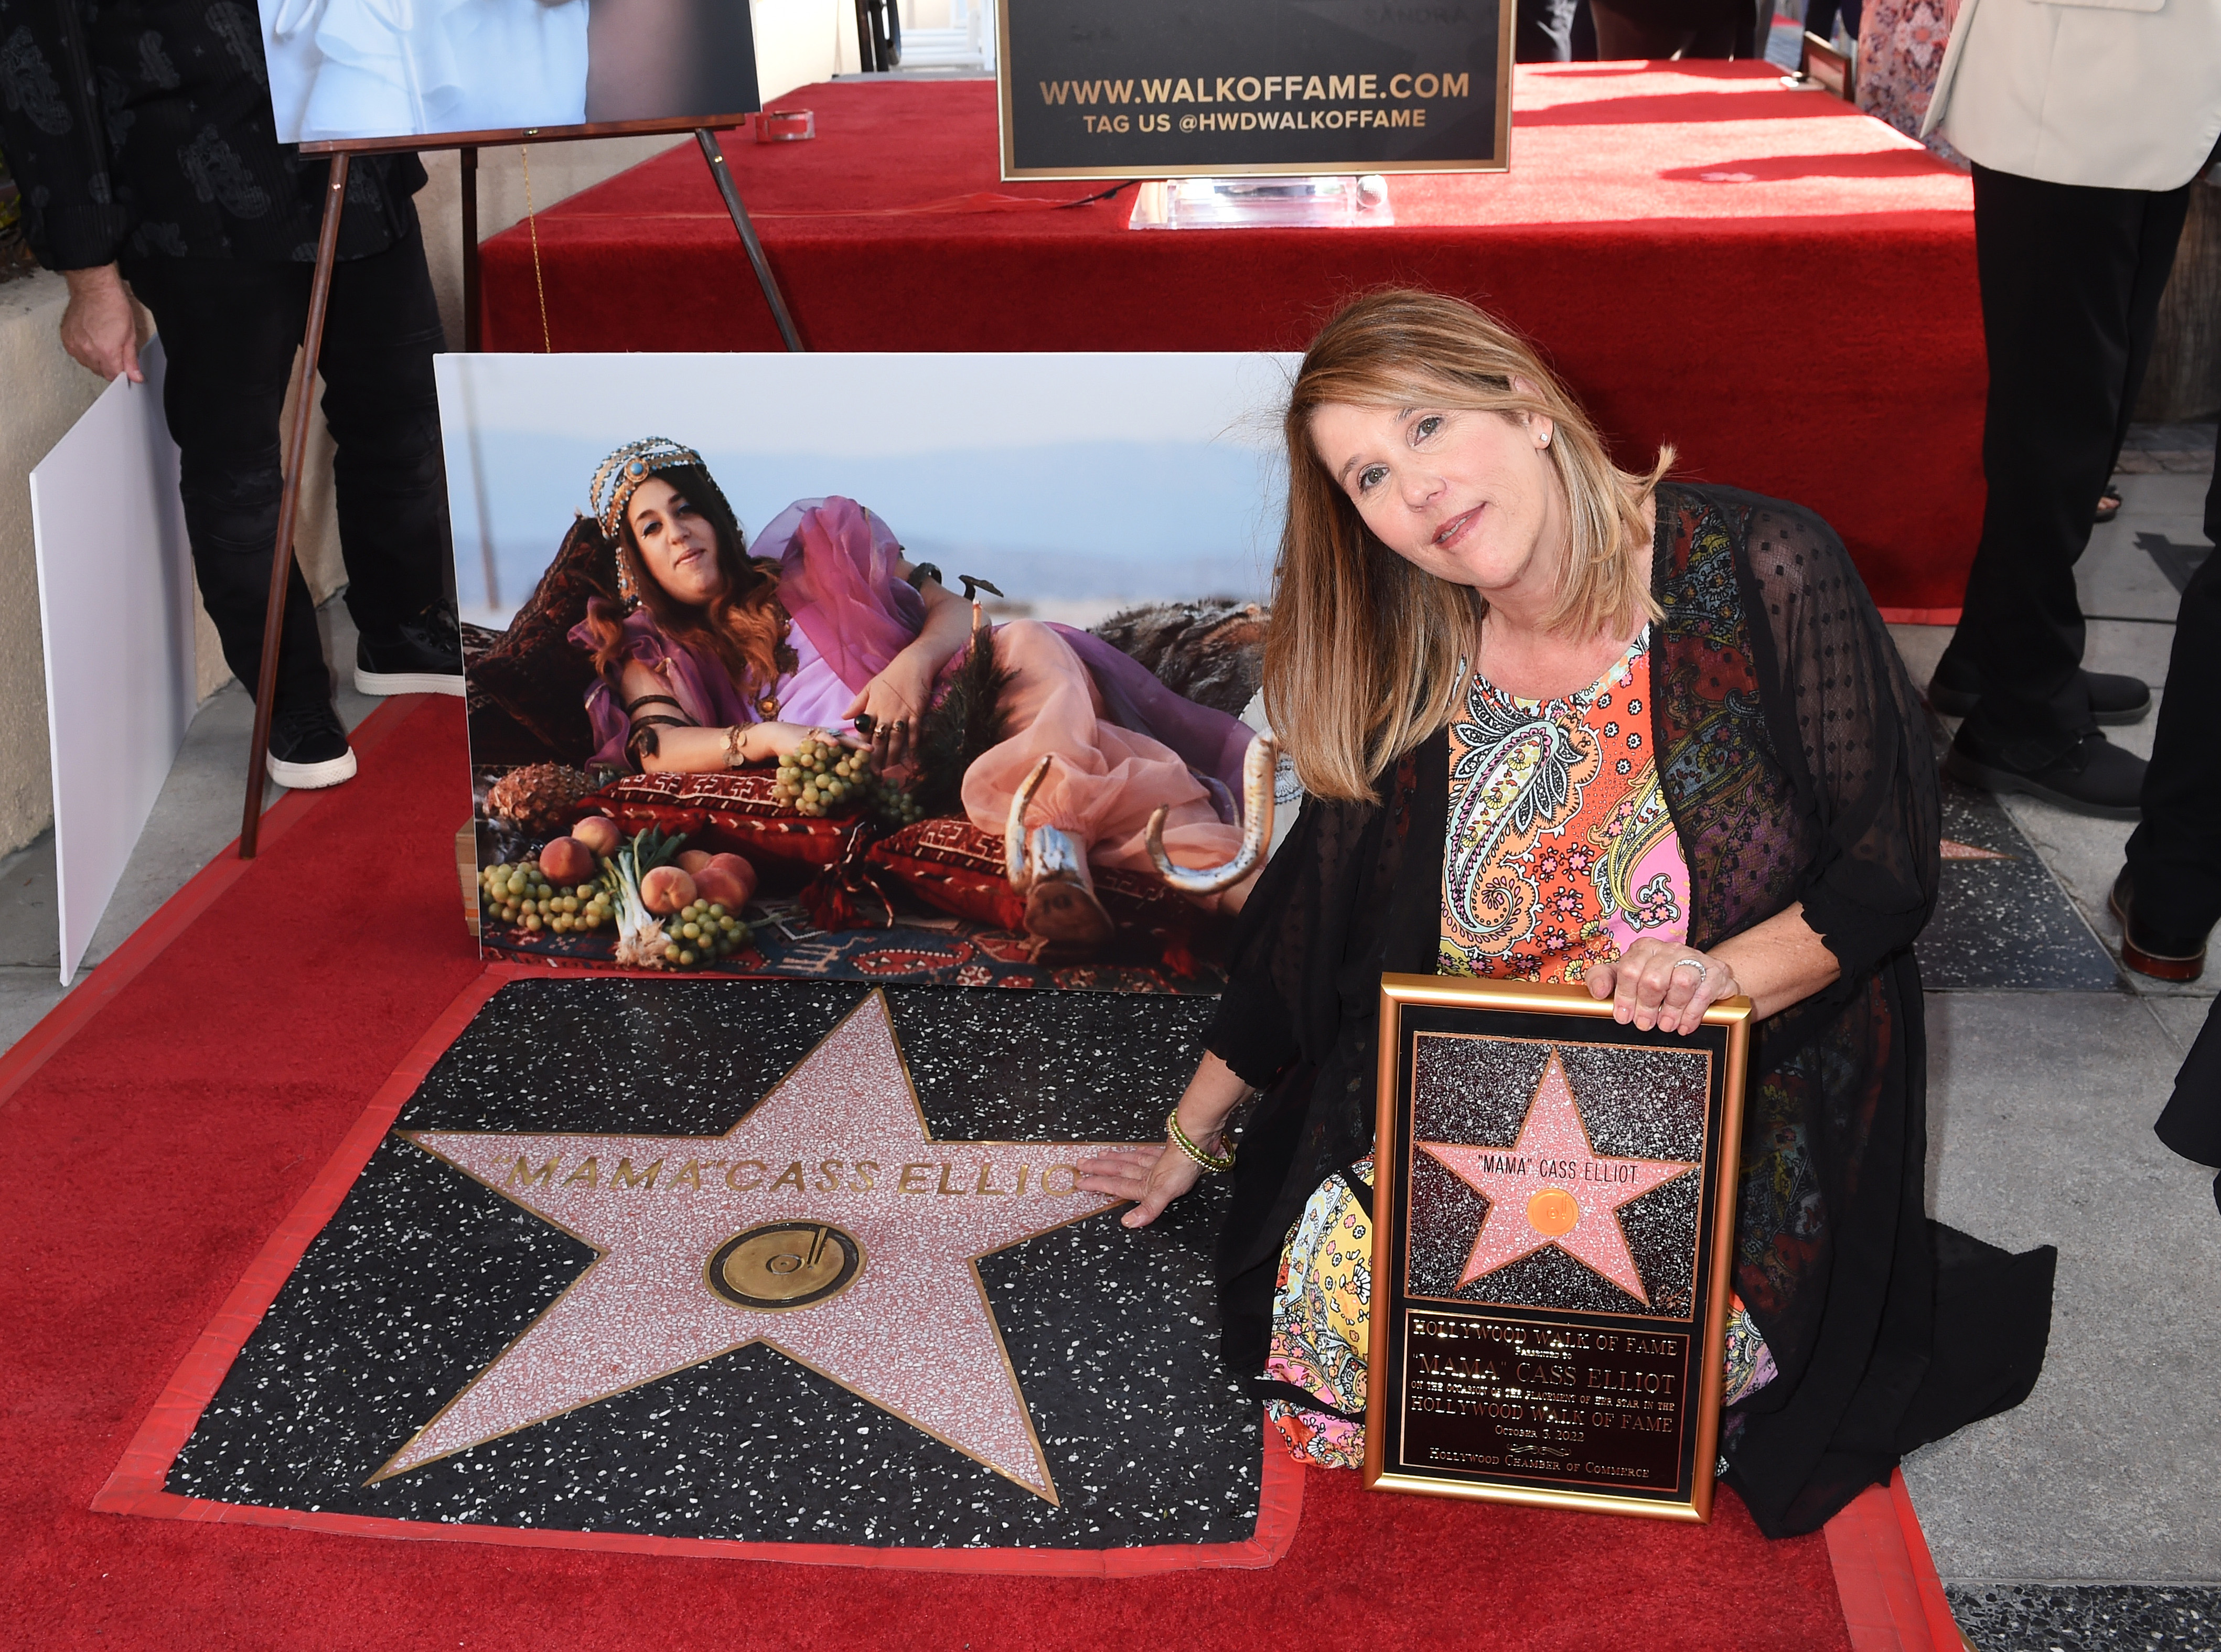 Owen Elliot-Kugell at the star ceremony where "Mama Cass" Elliot is honored with a star on the Hollywood Walk of Fame on October 3, 2022, in Los Angeles, California. | Source: Getty Images